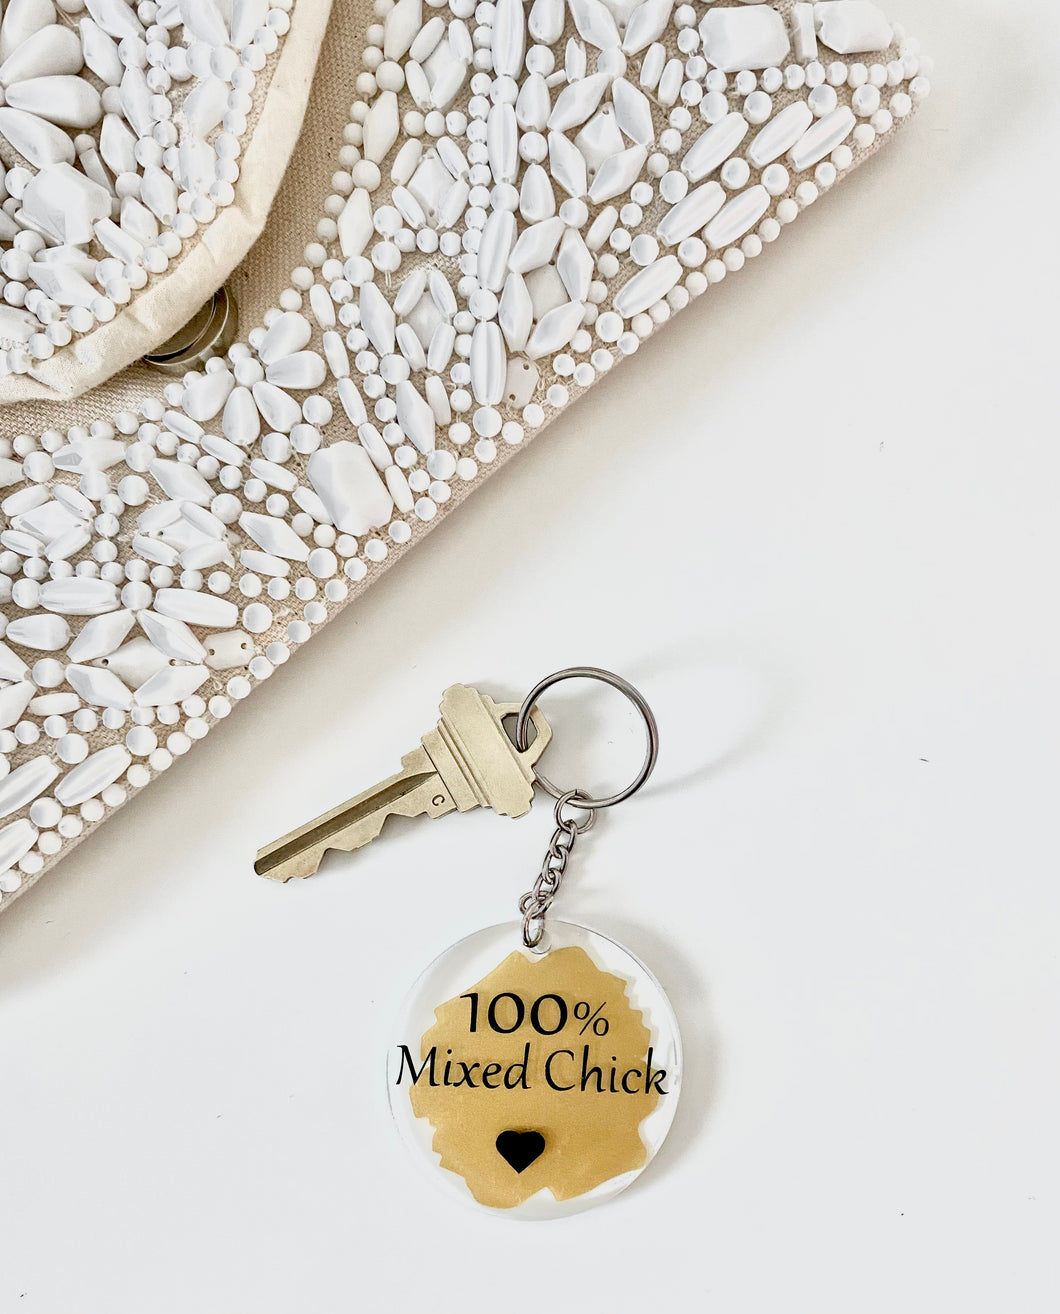 100 % Mixed Chick Keychain